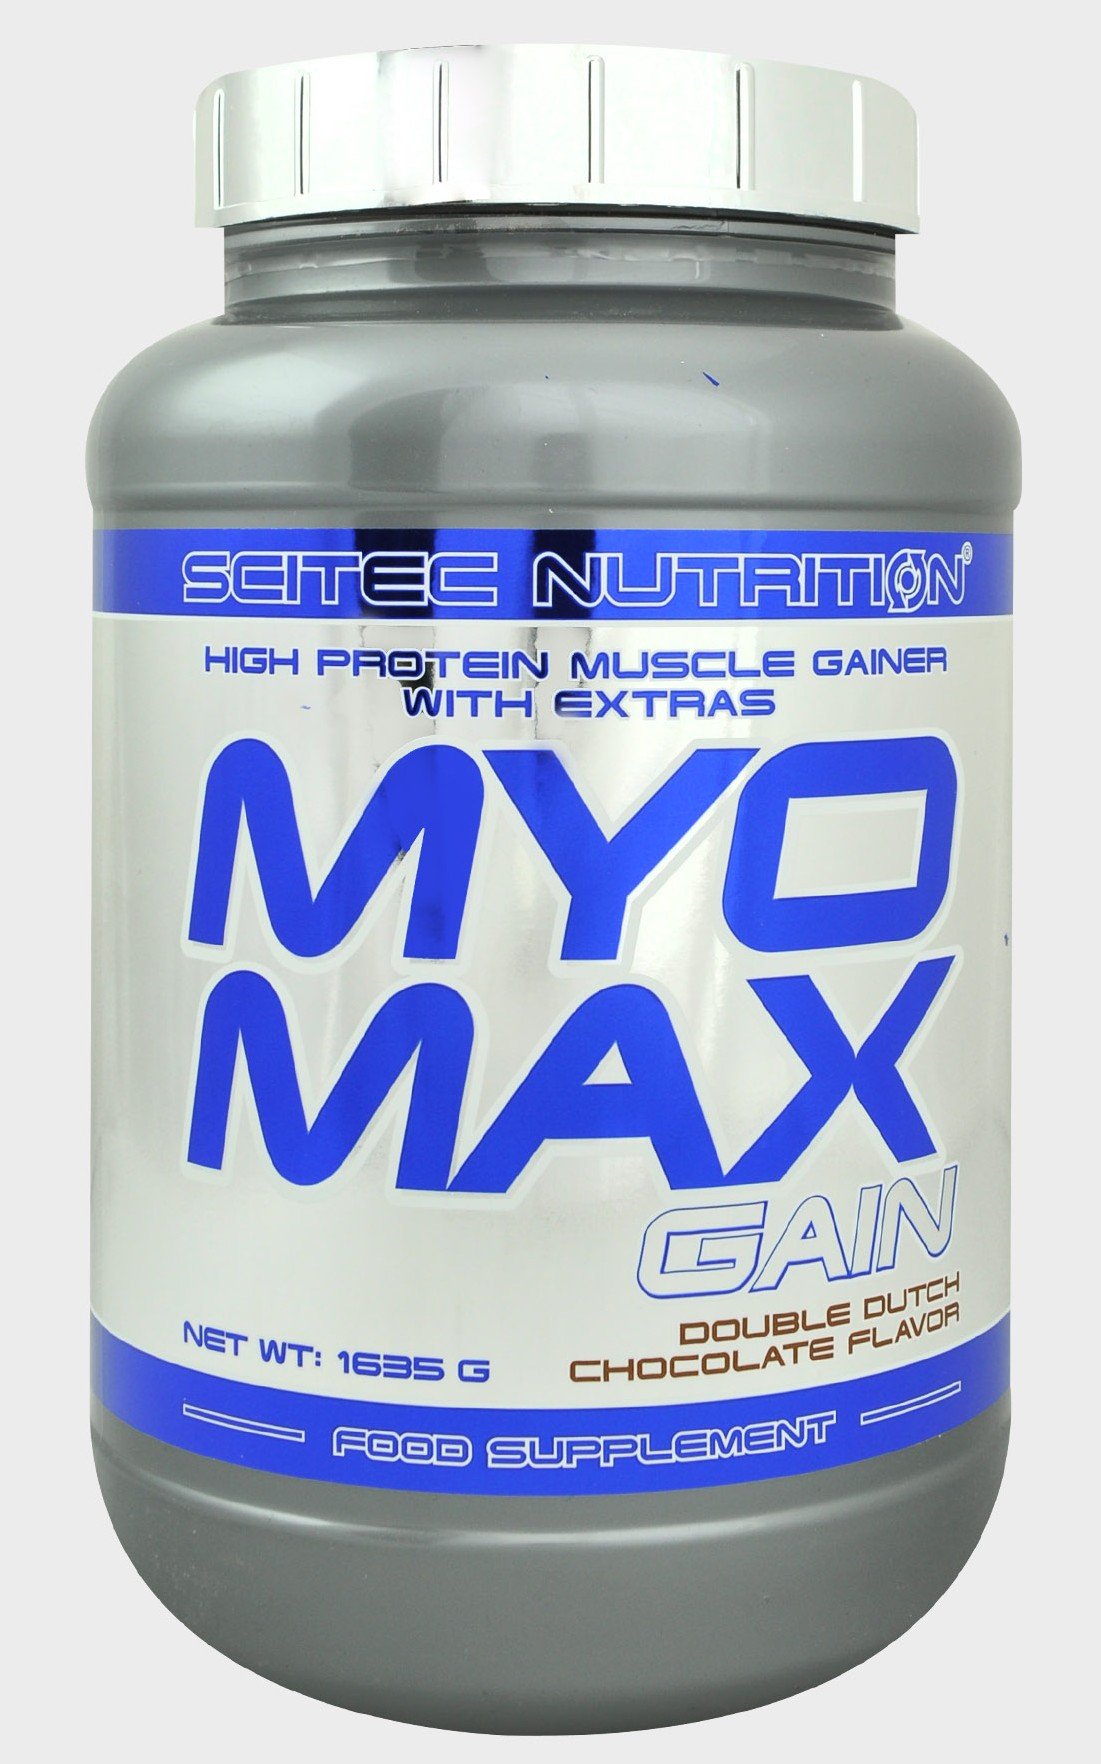 Myomax Gain, 1635 g, Scitec Nutrition. Meal replacement. 